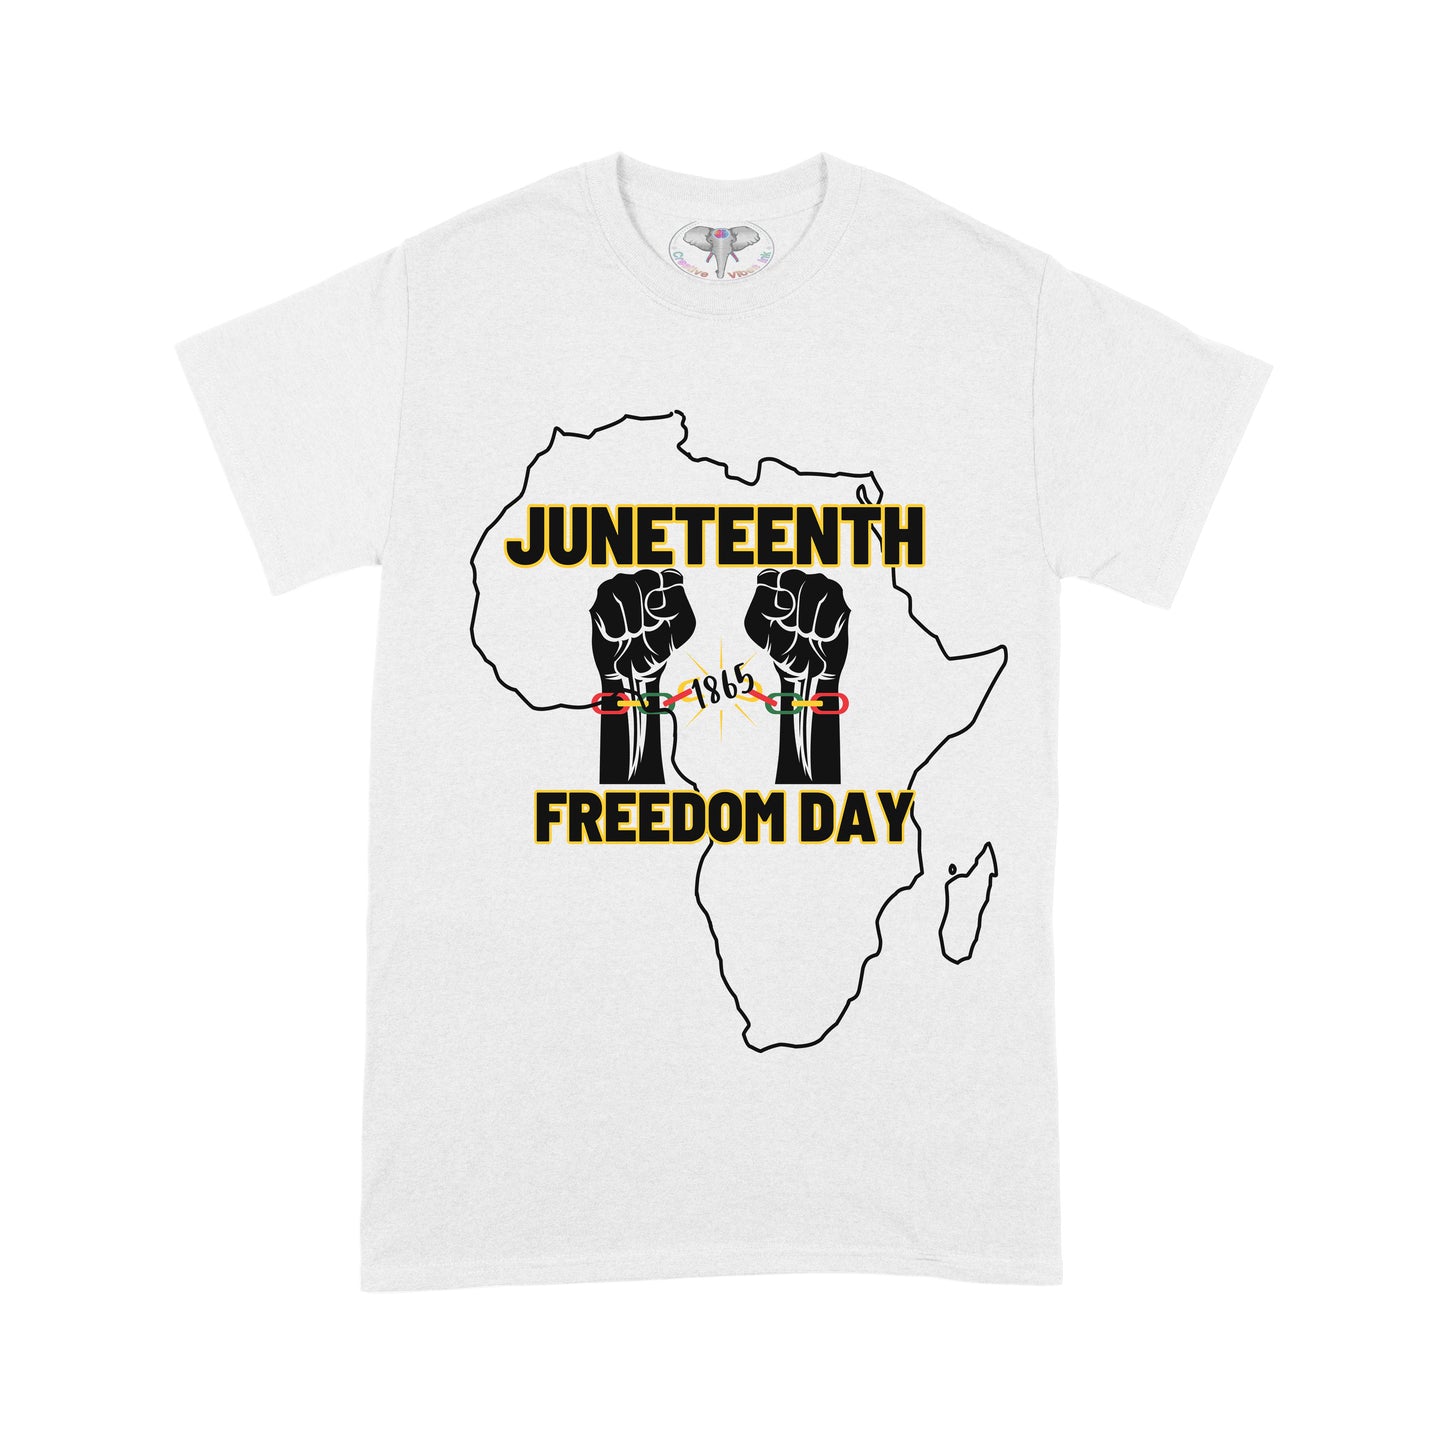 Juneteenth Freedom Day Graphic T-shirt